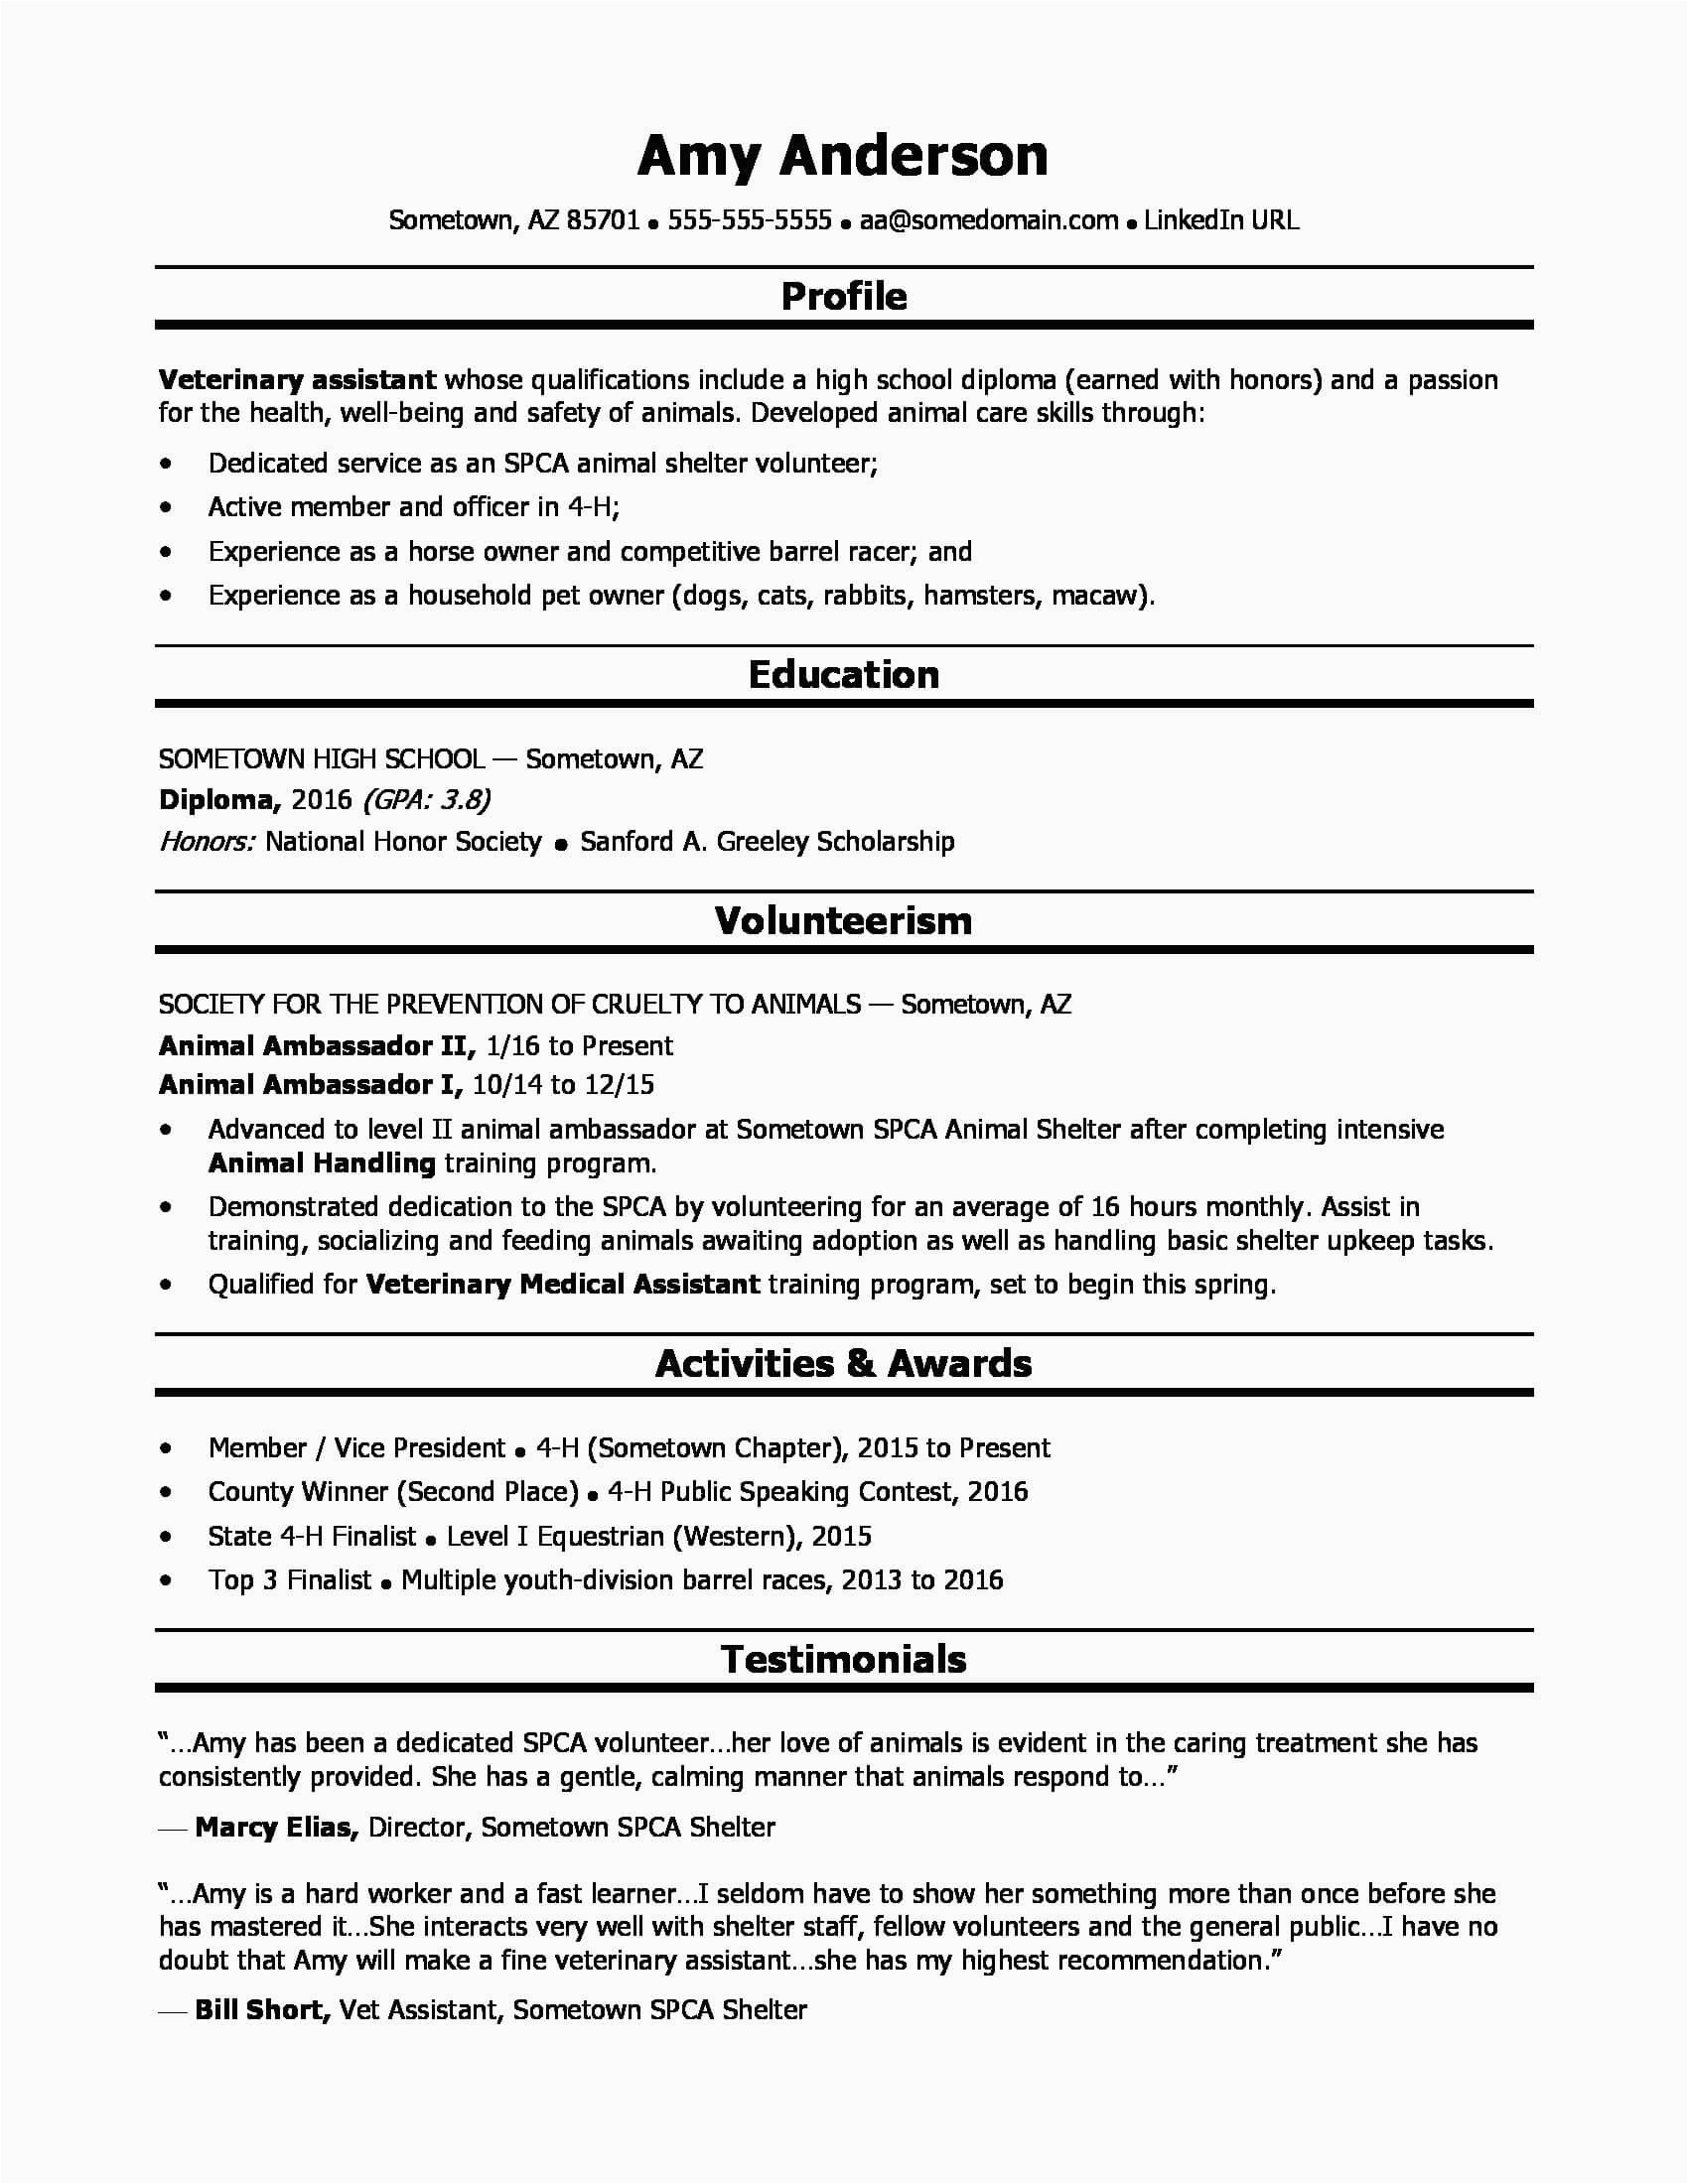 Sample Resume for A Hgh Schooler 4 High School Resume Templates and Examples